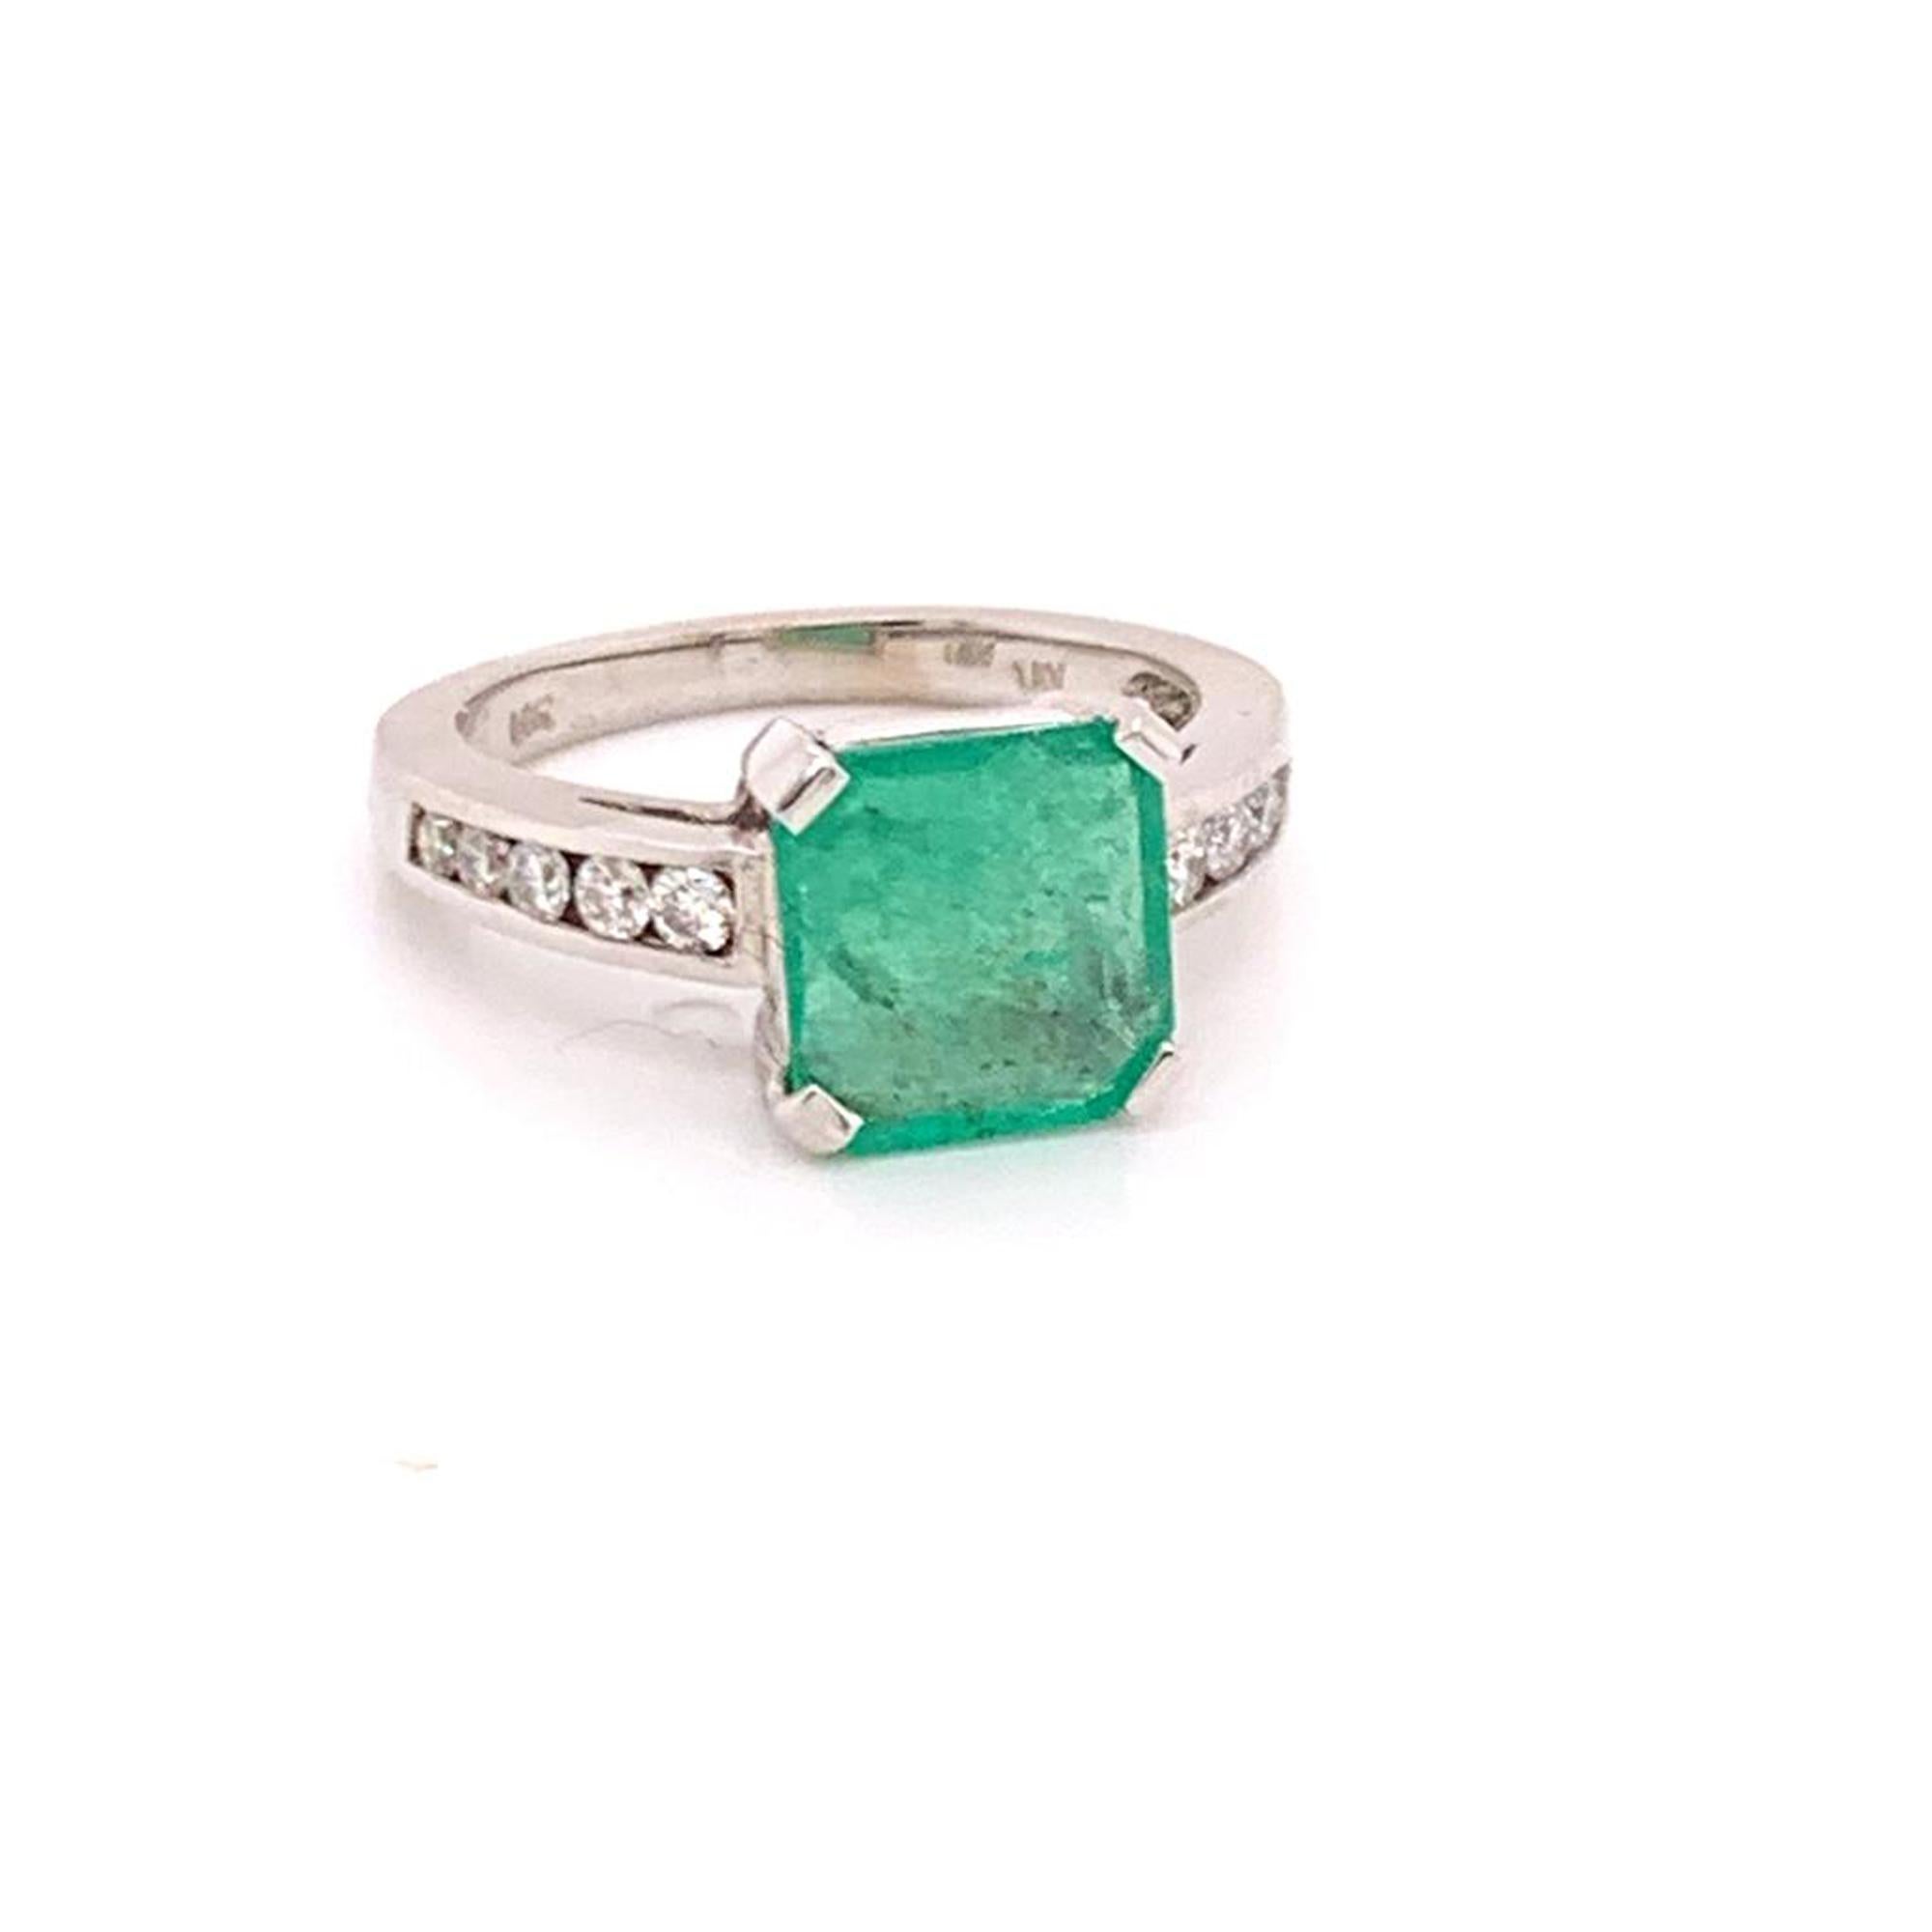 Natural Finely Faceted Quality Emerald Diamond Ring 14k Gold 2.55 TCW Women Certified $3,800 912292

This is a Unique Custom Made Glamorous Piece of Jewelry!

Nothing says, “I Love you” more than Diamonds and Pearls!

This Emerald ring has been